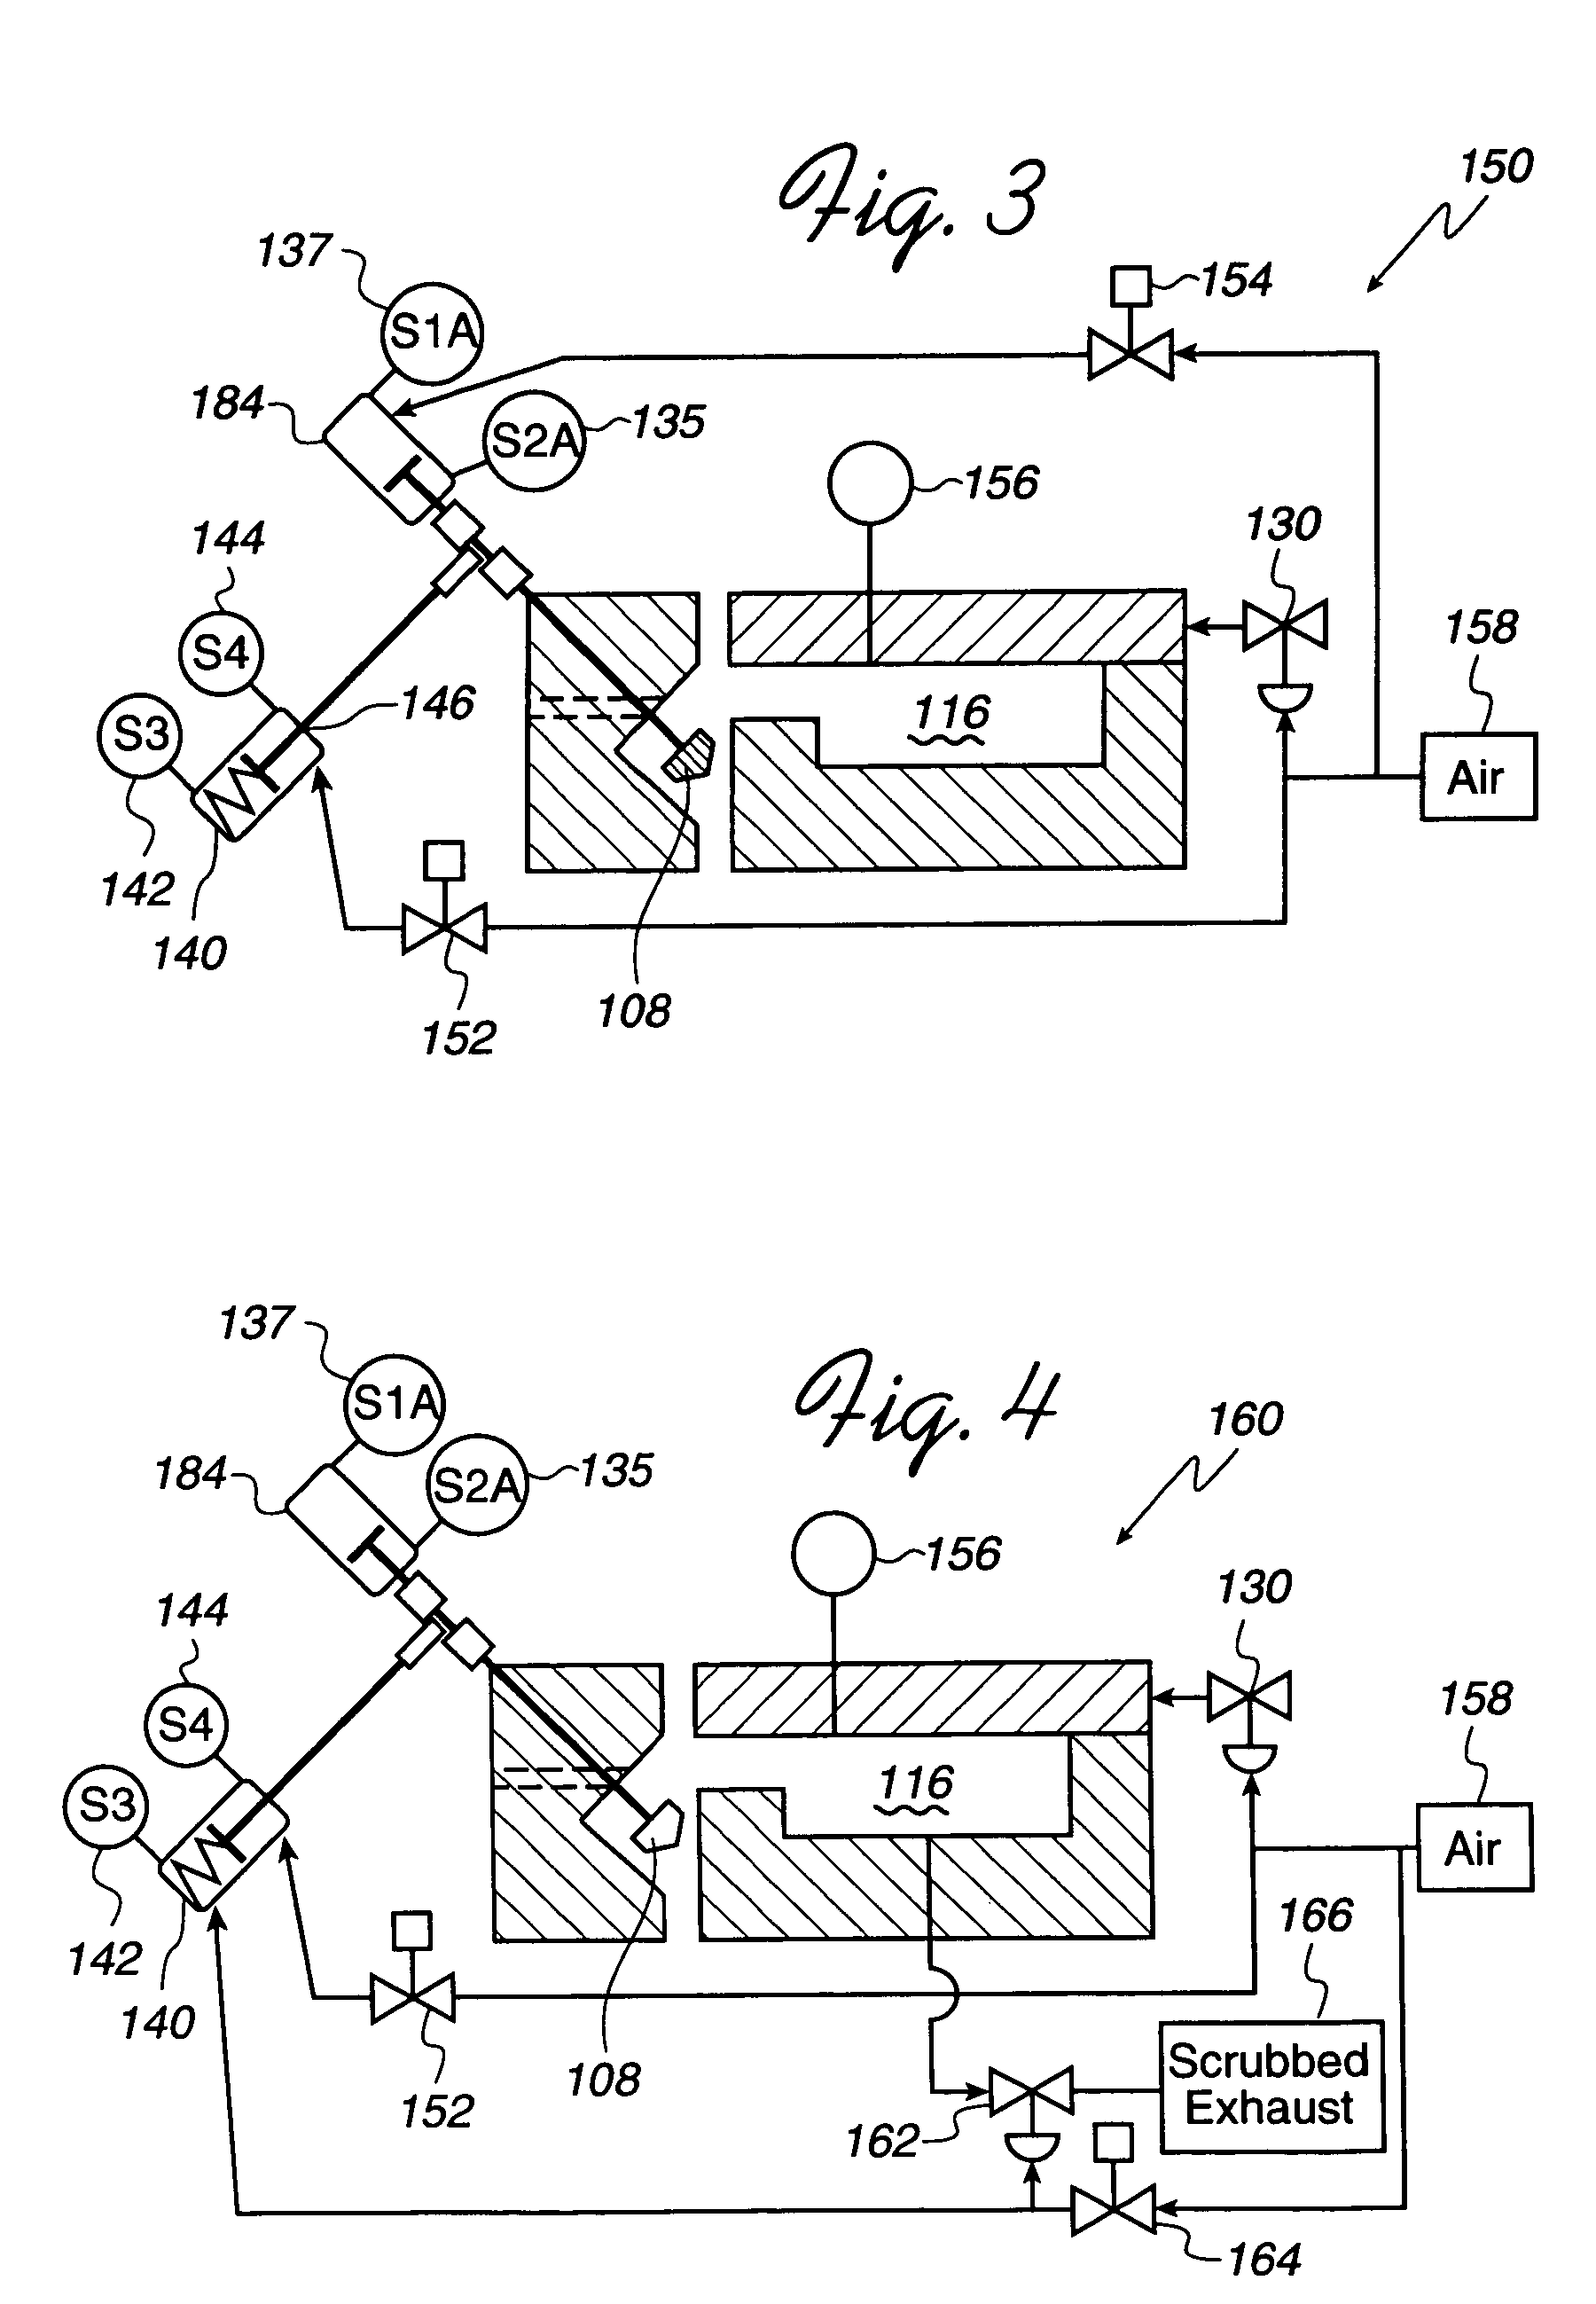 Method and apparatus for sealing substrate load port in a high pressure reactor